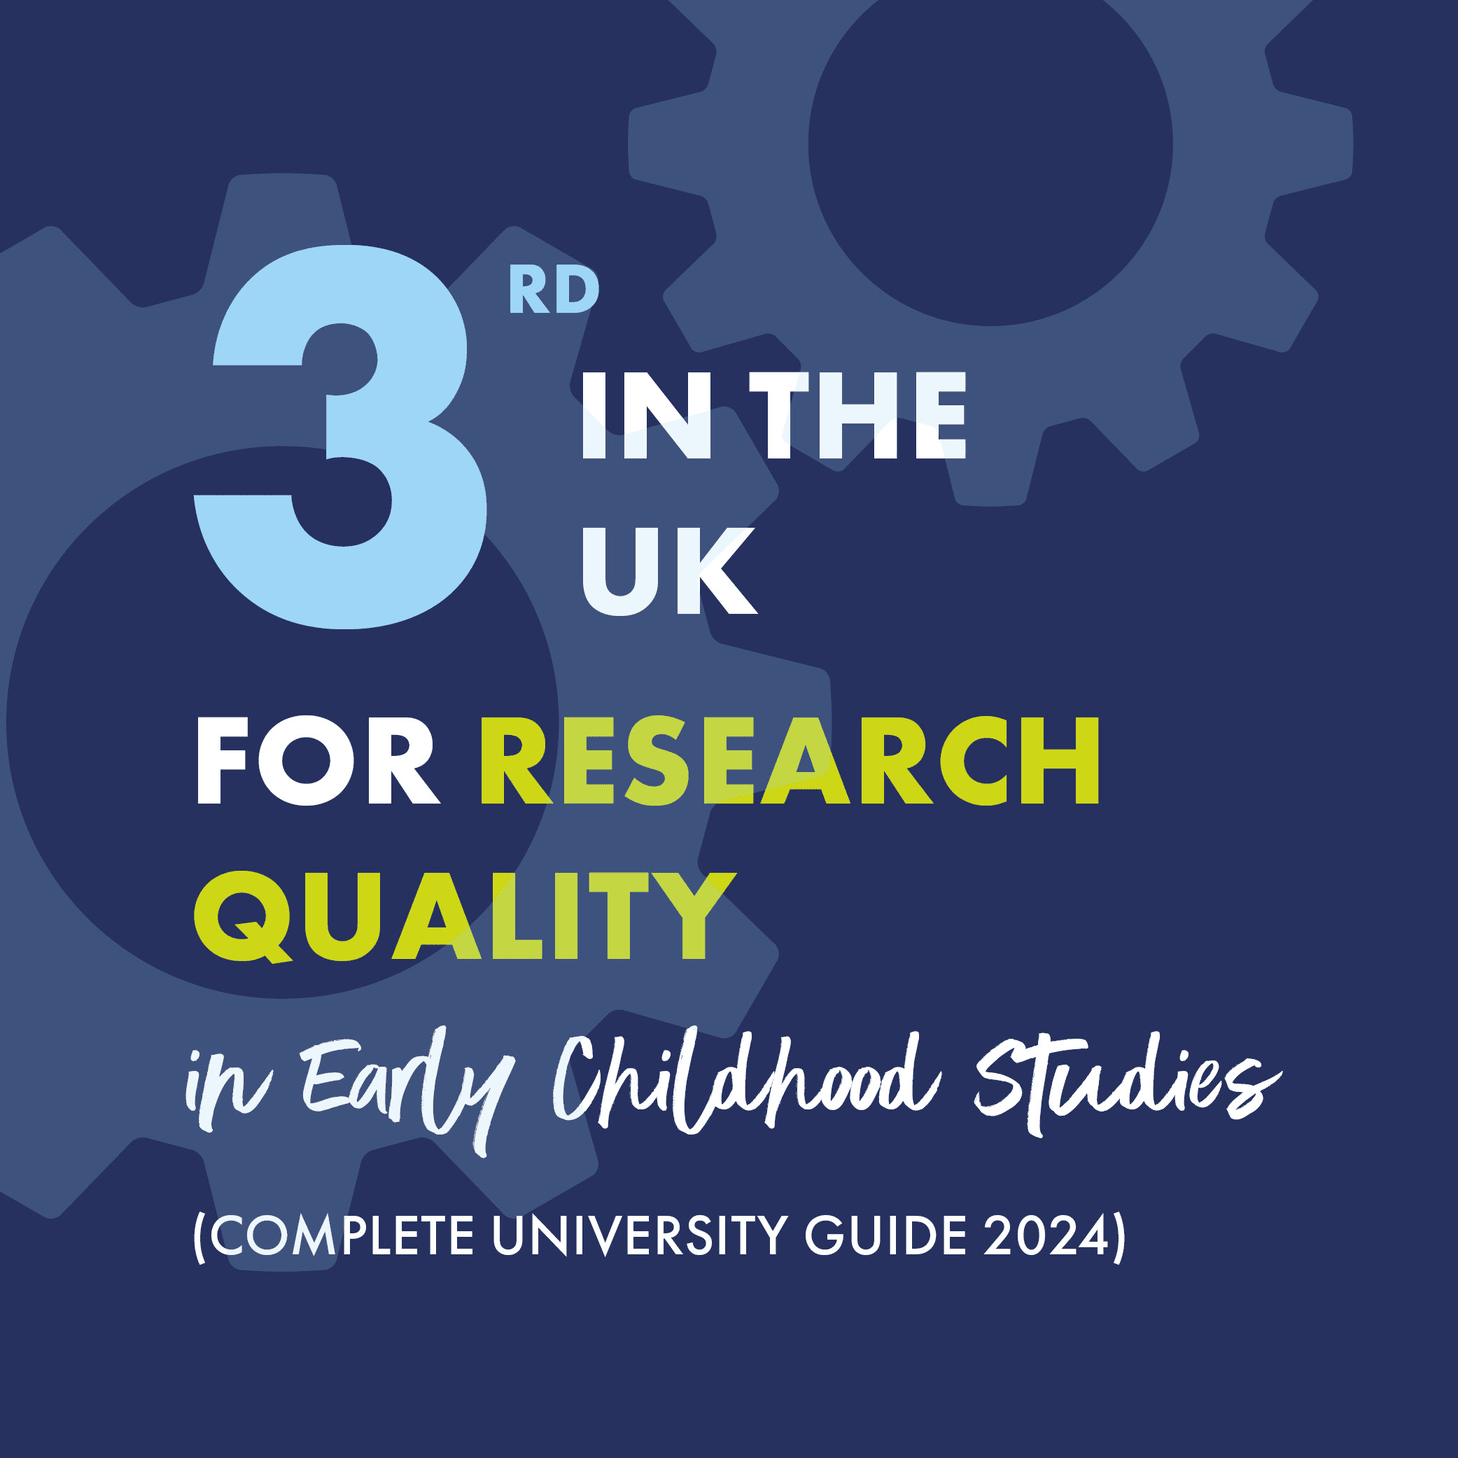 3rd in the UK for Research Quality